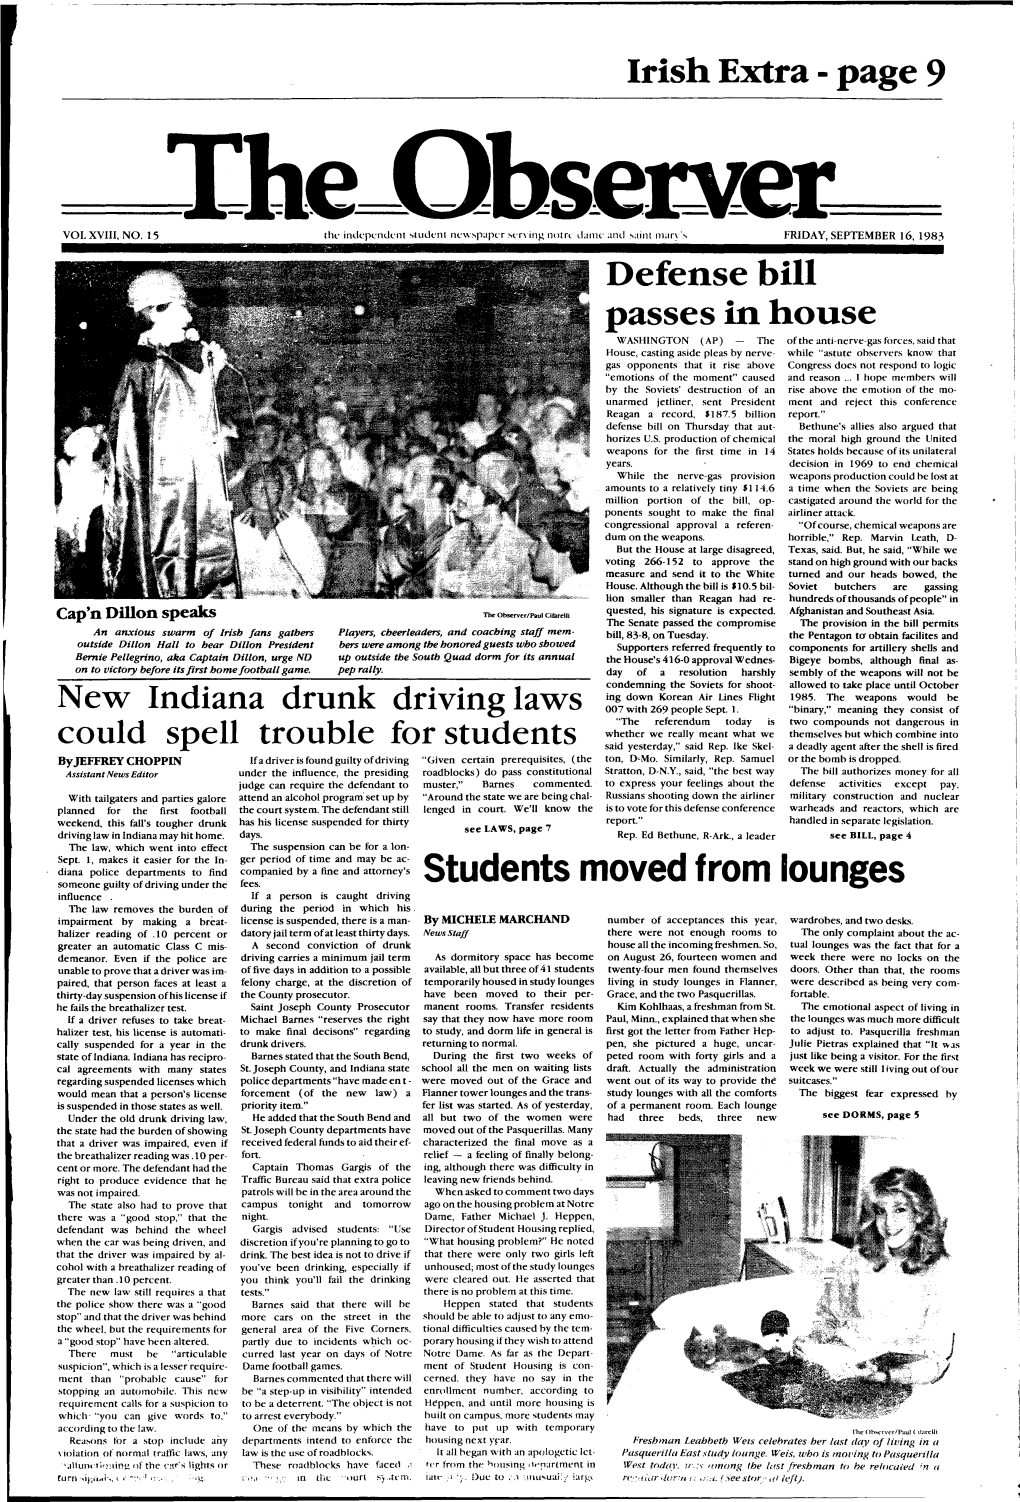 Students Moved from Lounges Influence